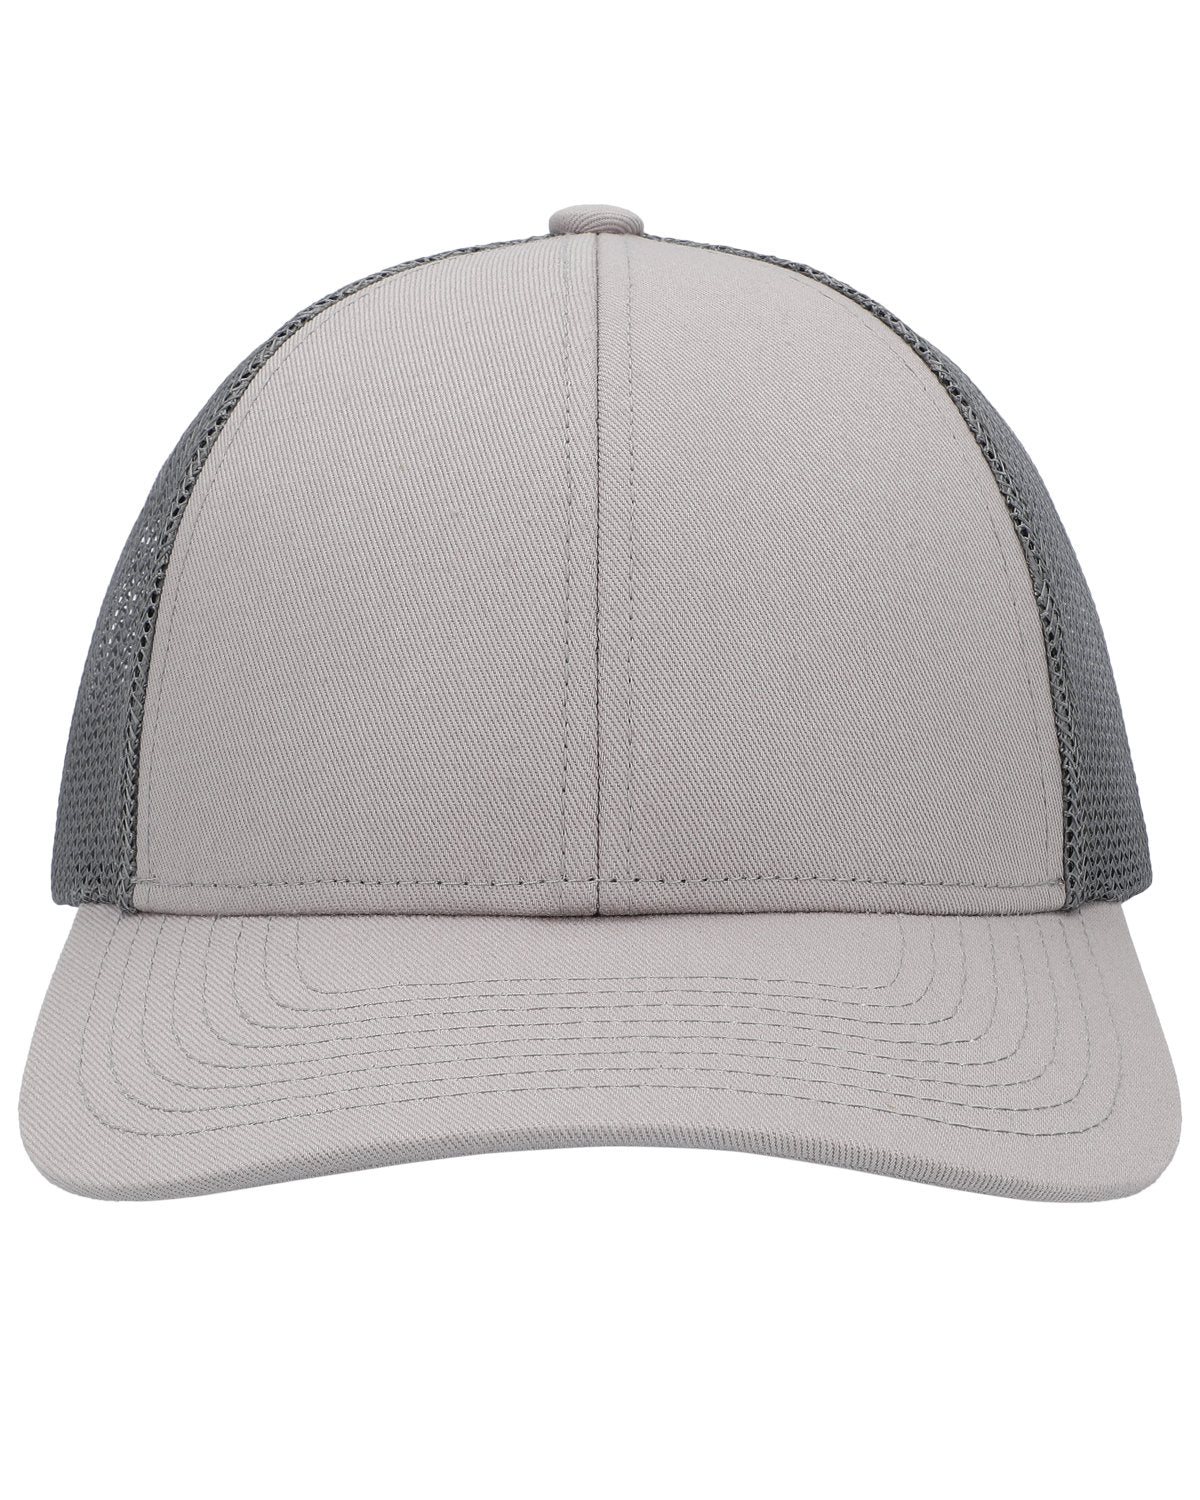 P114-PacificHeadwear-49-HGRY_LCH_HG-OS